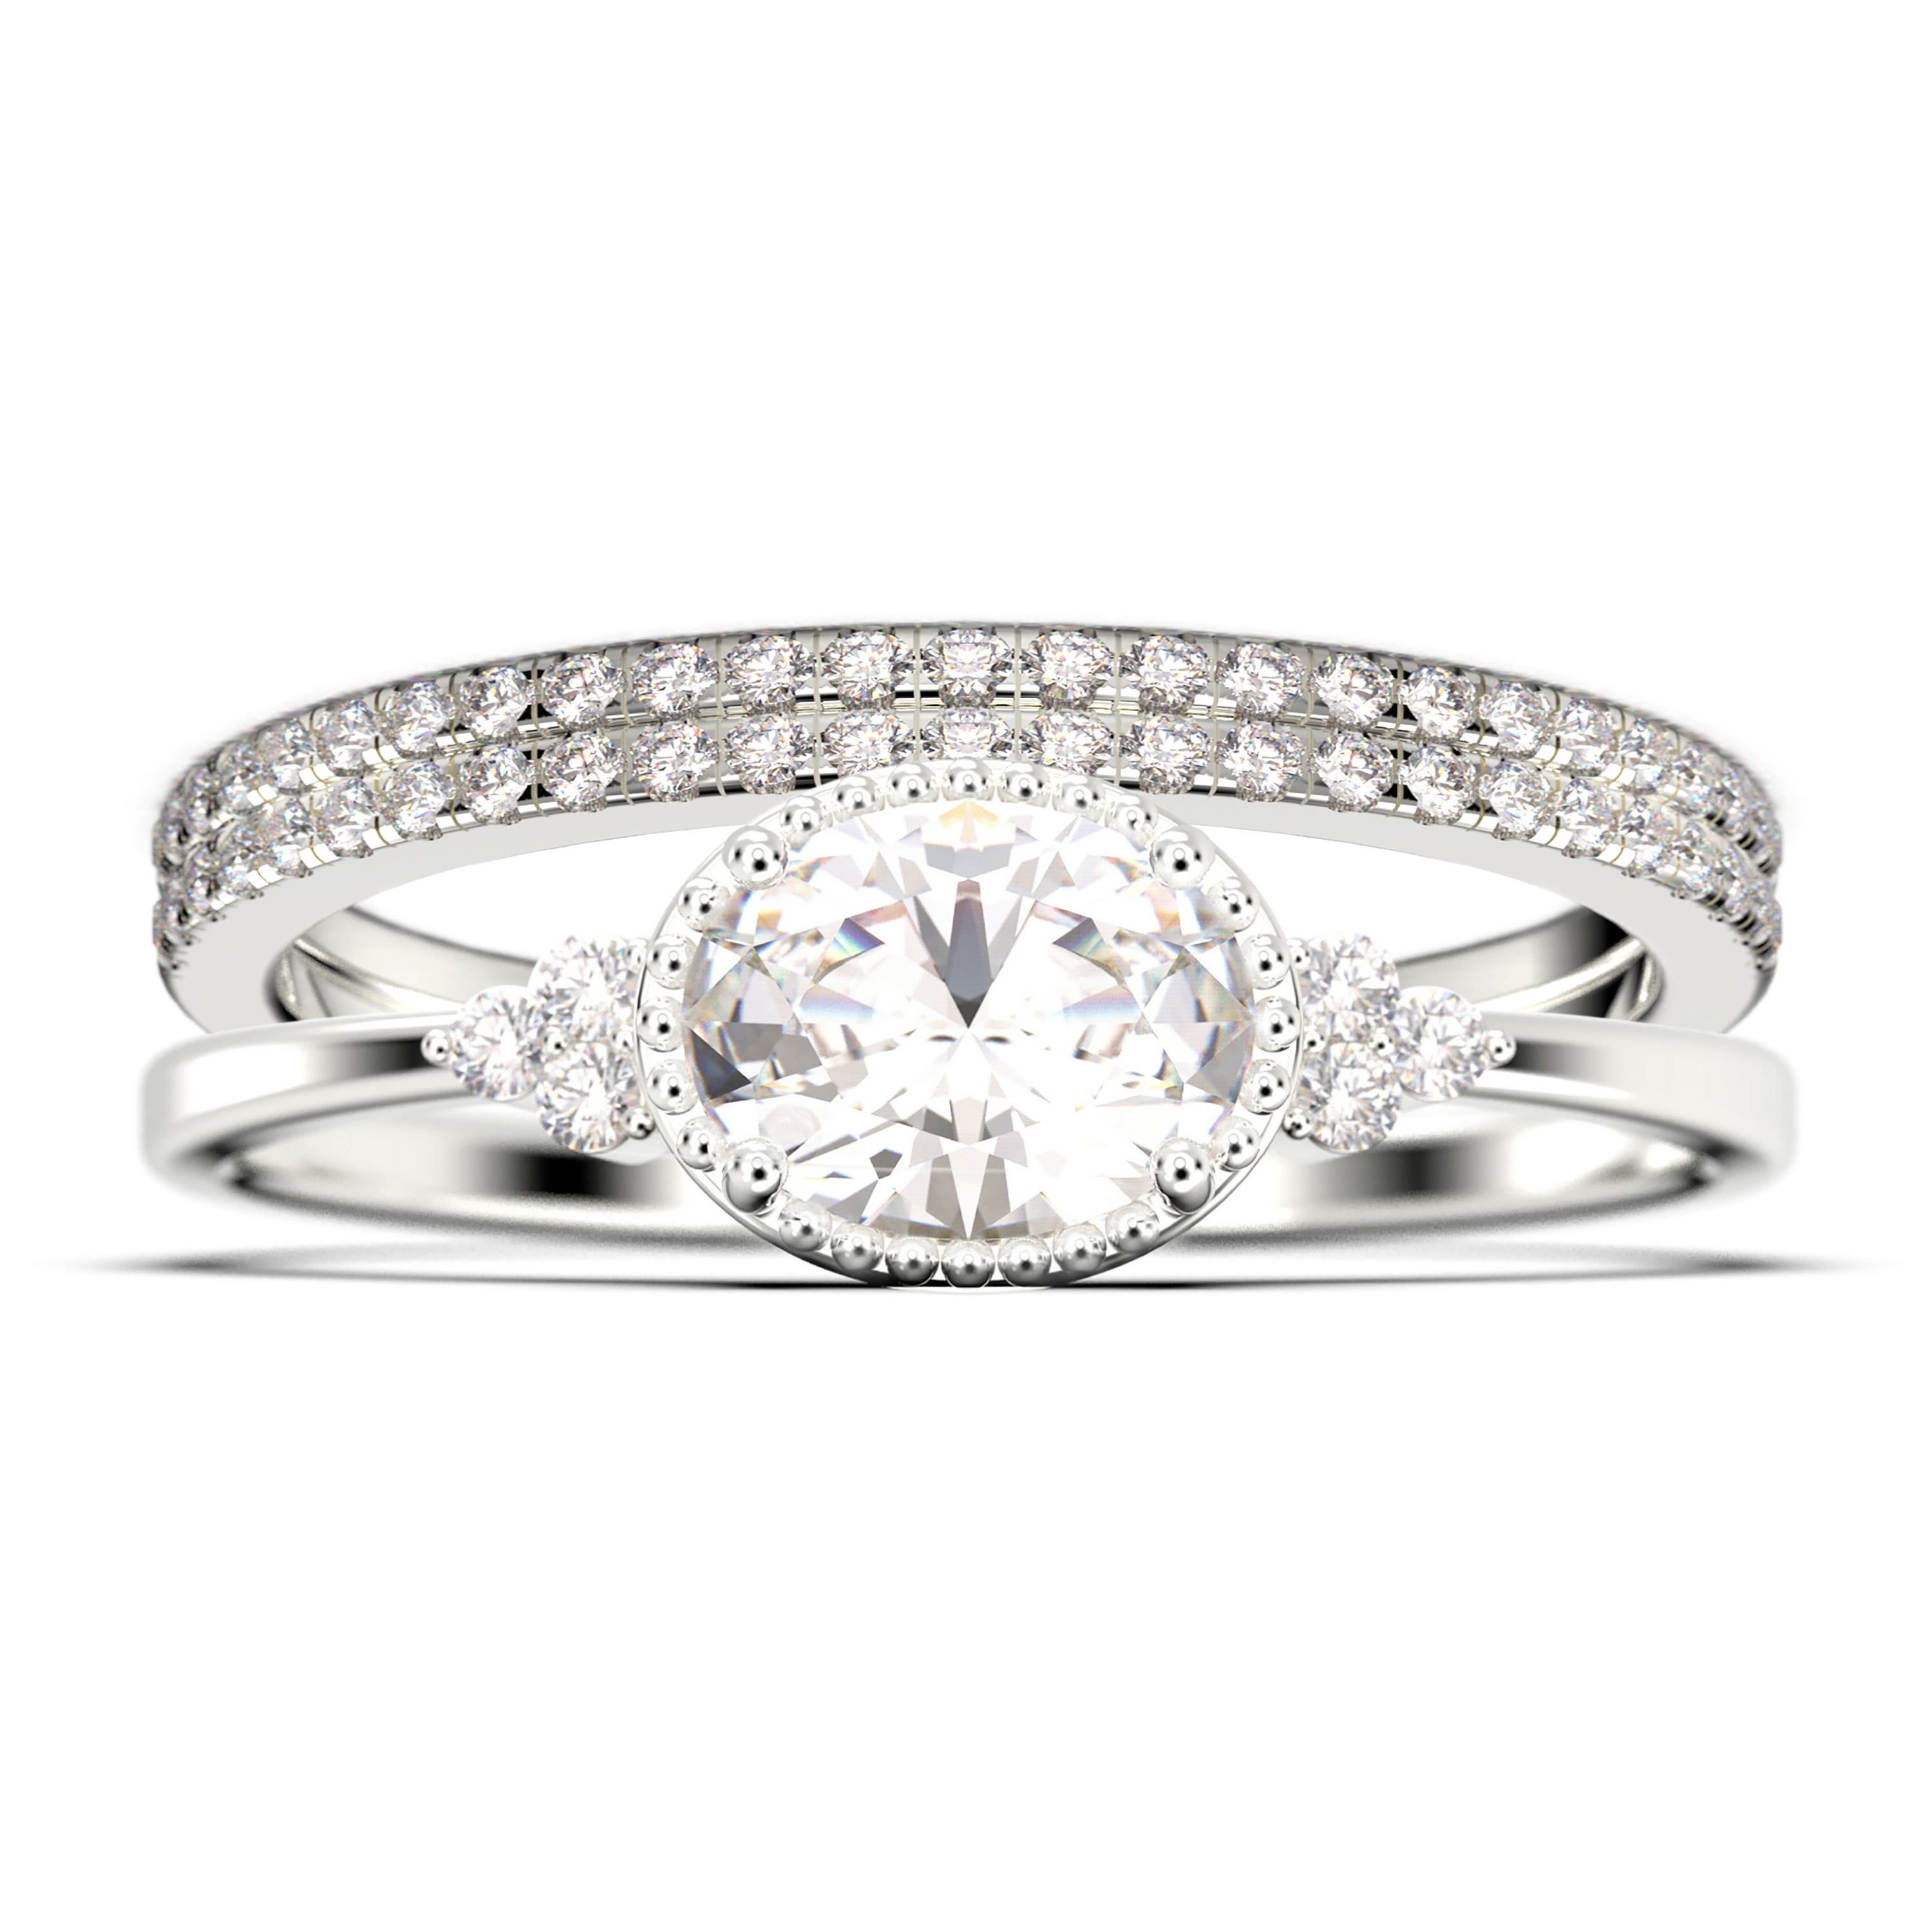 Details about   VVS1 2.00 CT Oval Cut Solitaire Diamond Engagement Ring in 14k Yellow Gold Over 